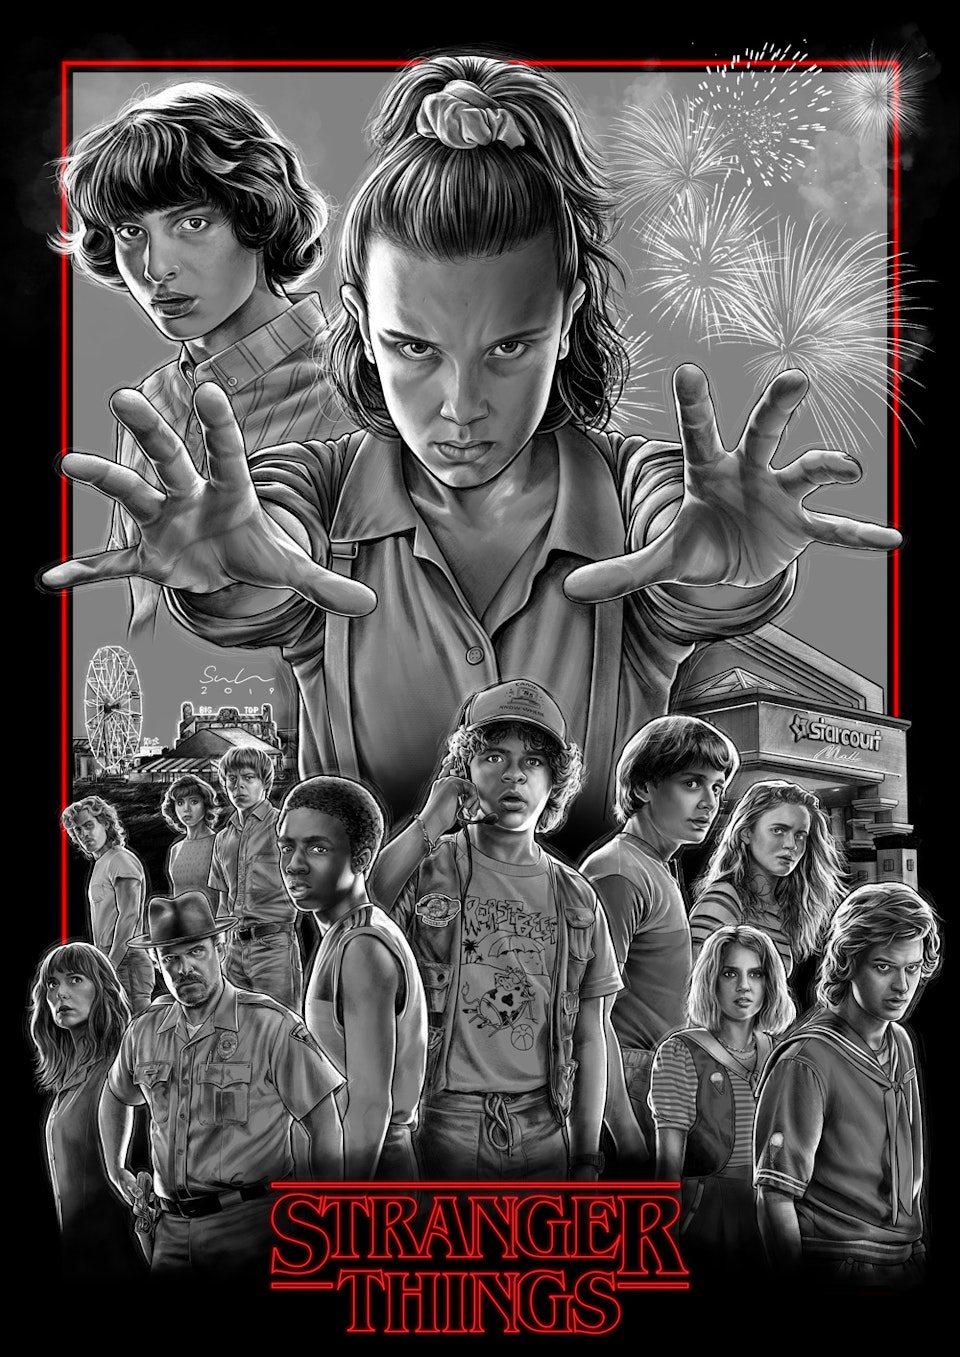 Stranger Things - This is the poster drawing fully assembled with the border effects and logo placement. From here I coloured the the piece as a whole, adding effects such as lighting on the logo at the same time to create a cohesive image.

Below you can see an animation of the colours coming together once the piece was fully assembled.